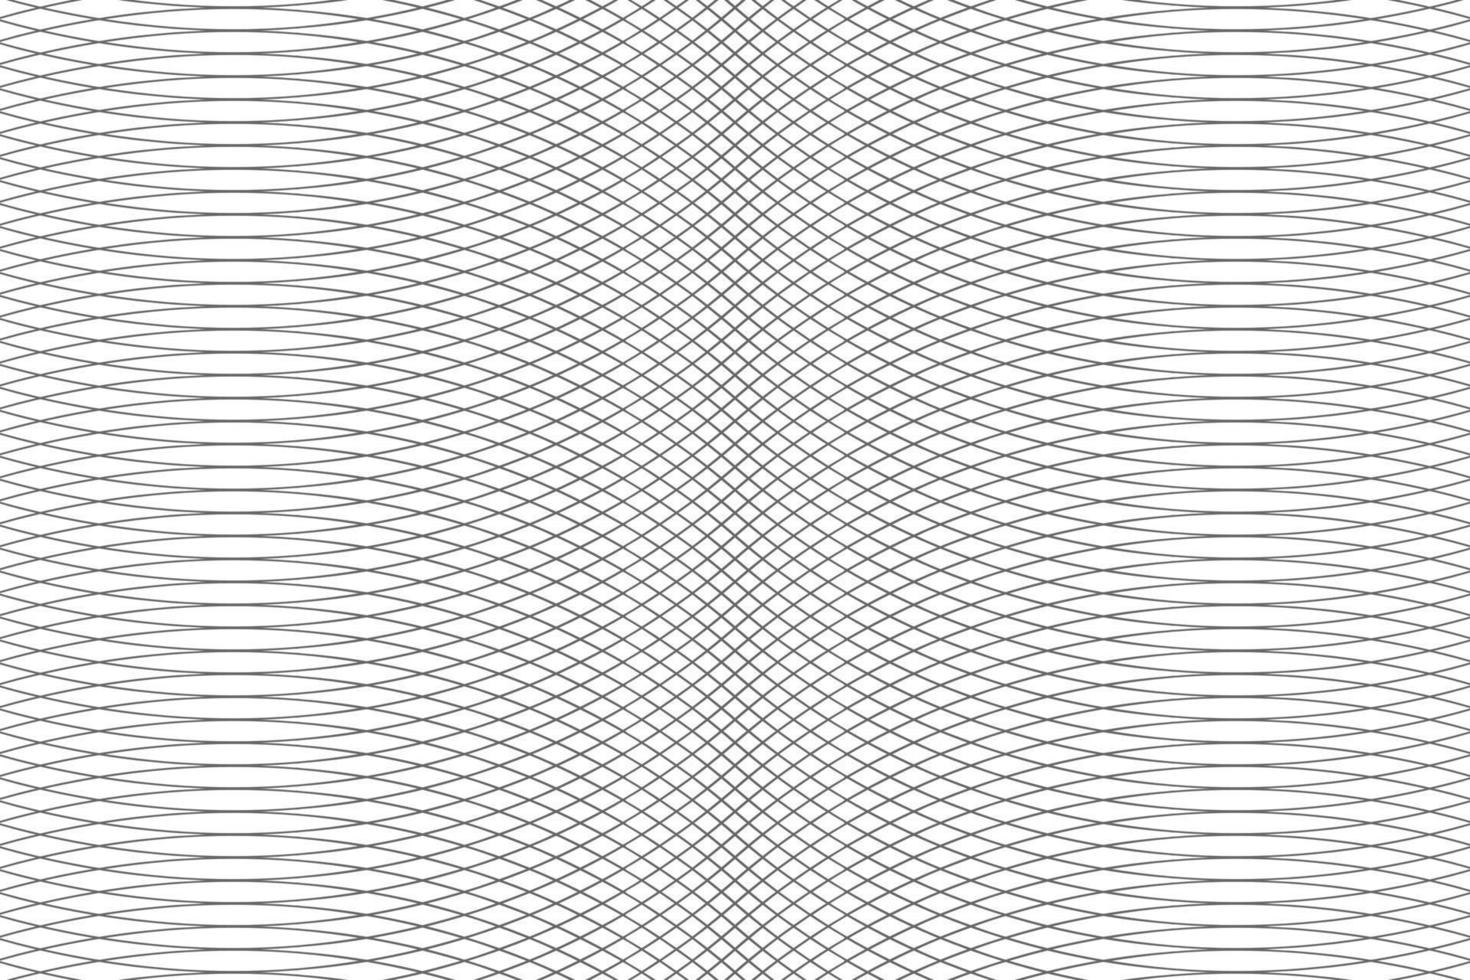 abstract monochrome seamless curved lines pattern design. vector